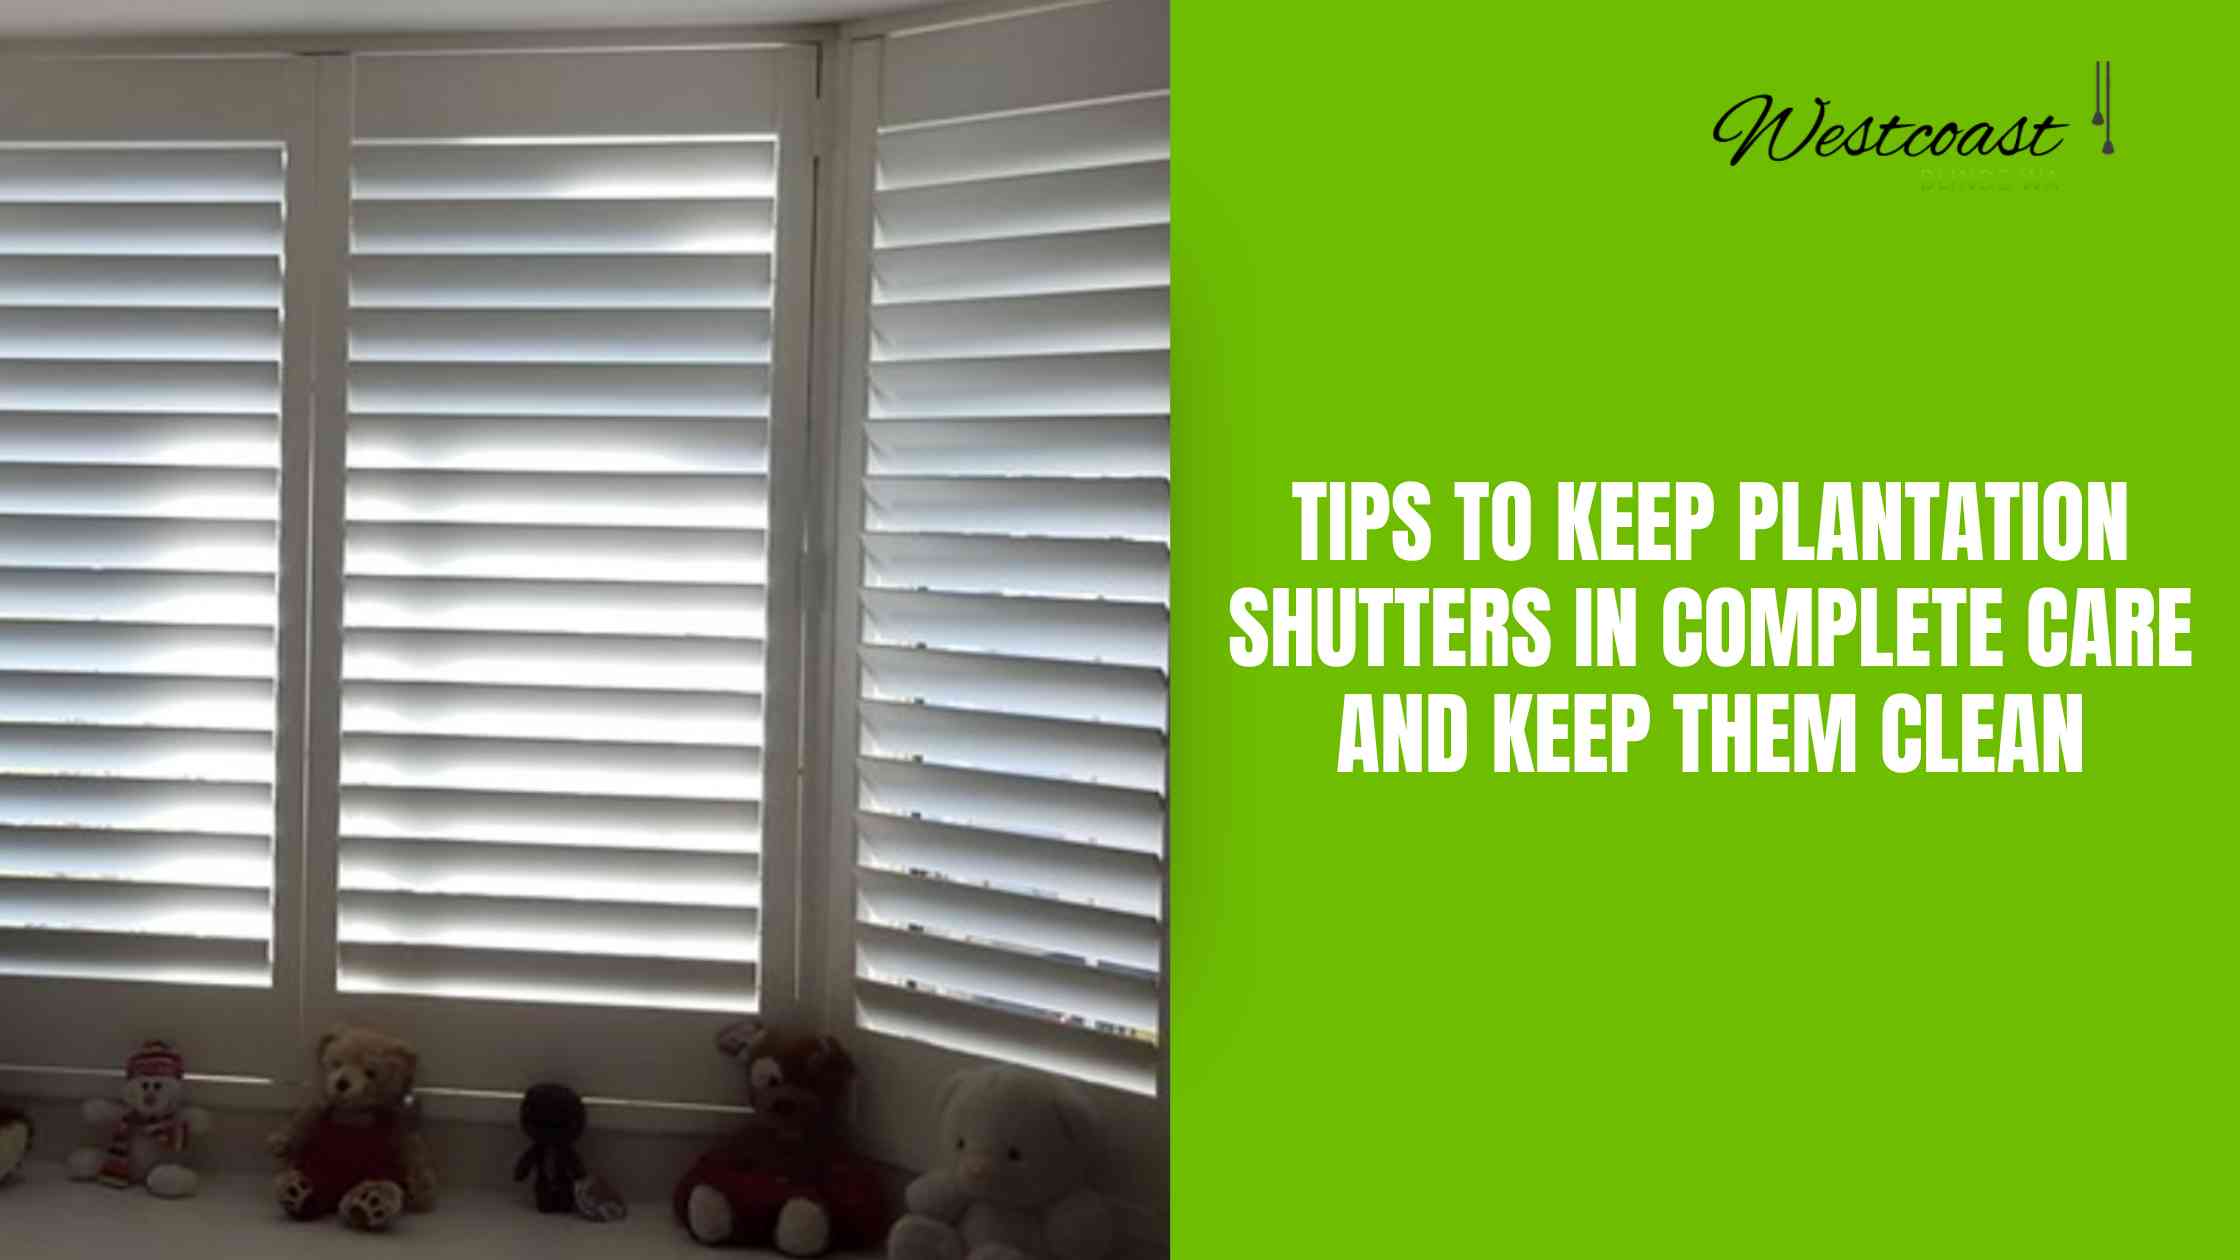 How Should You Take Care Of Plantation Shutters And Keep Them Clean?